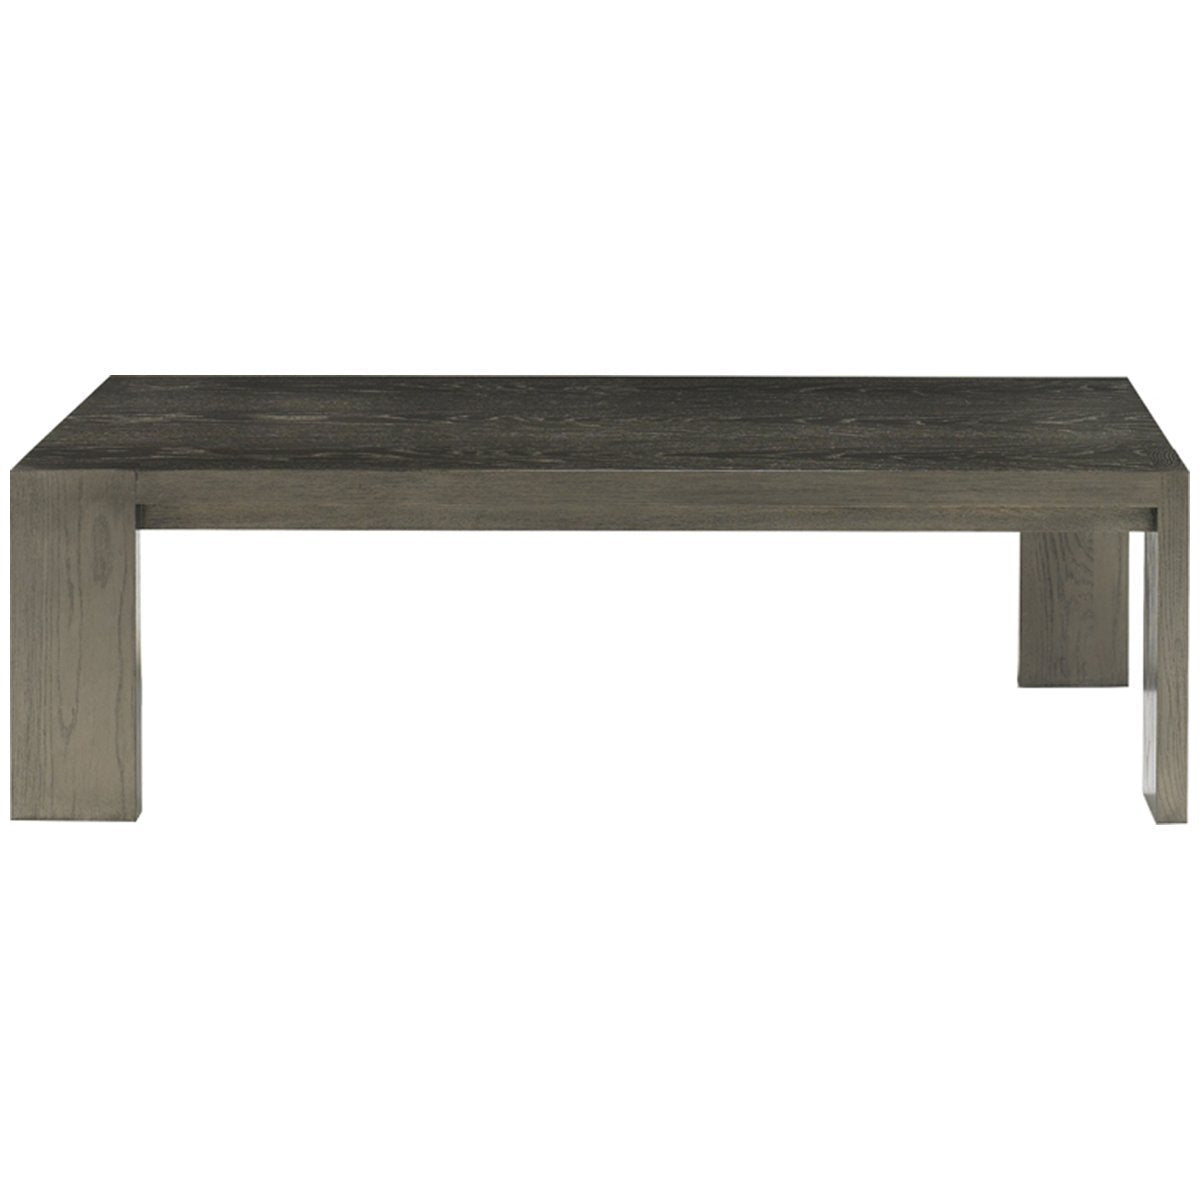 CTH Sherrill Occasional Flint Rectangular Cocktail Table